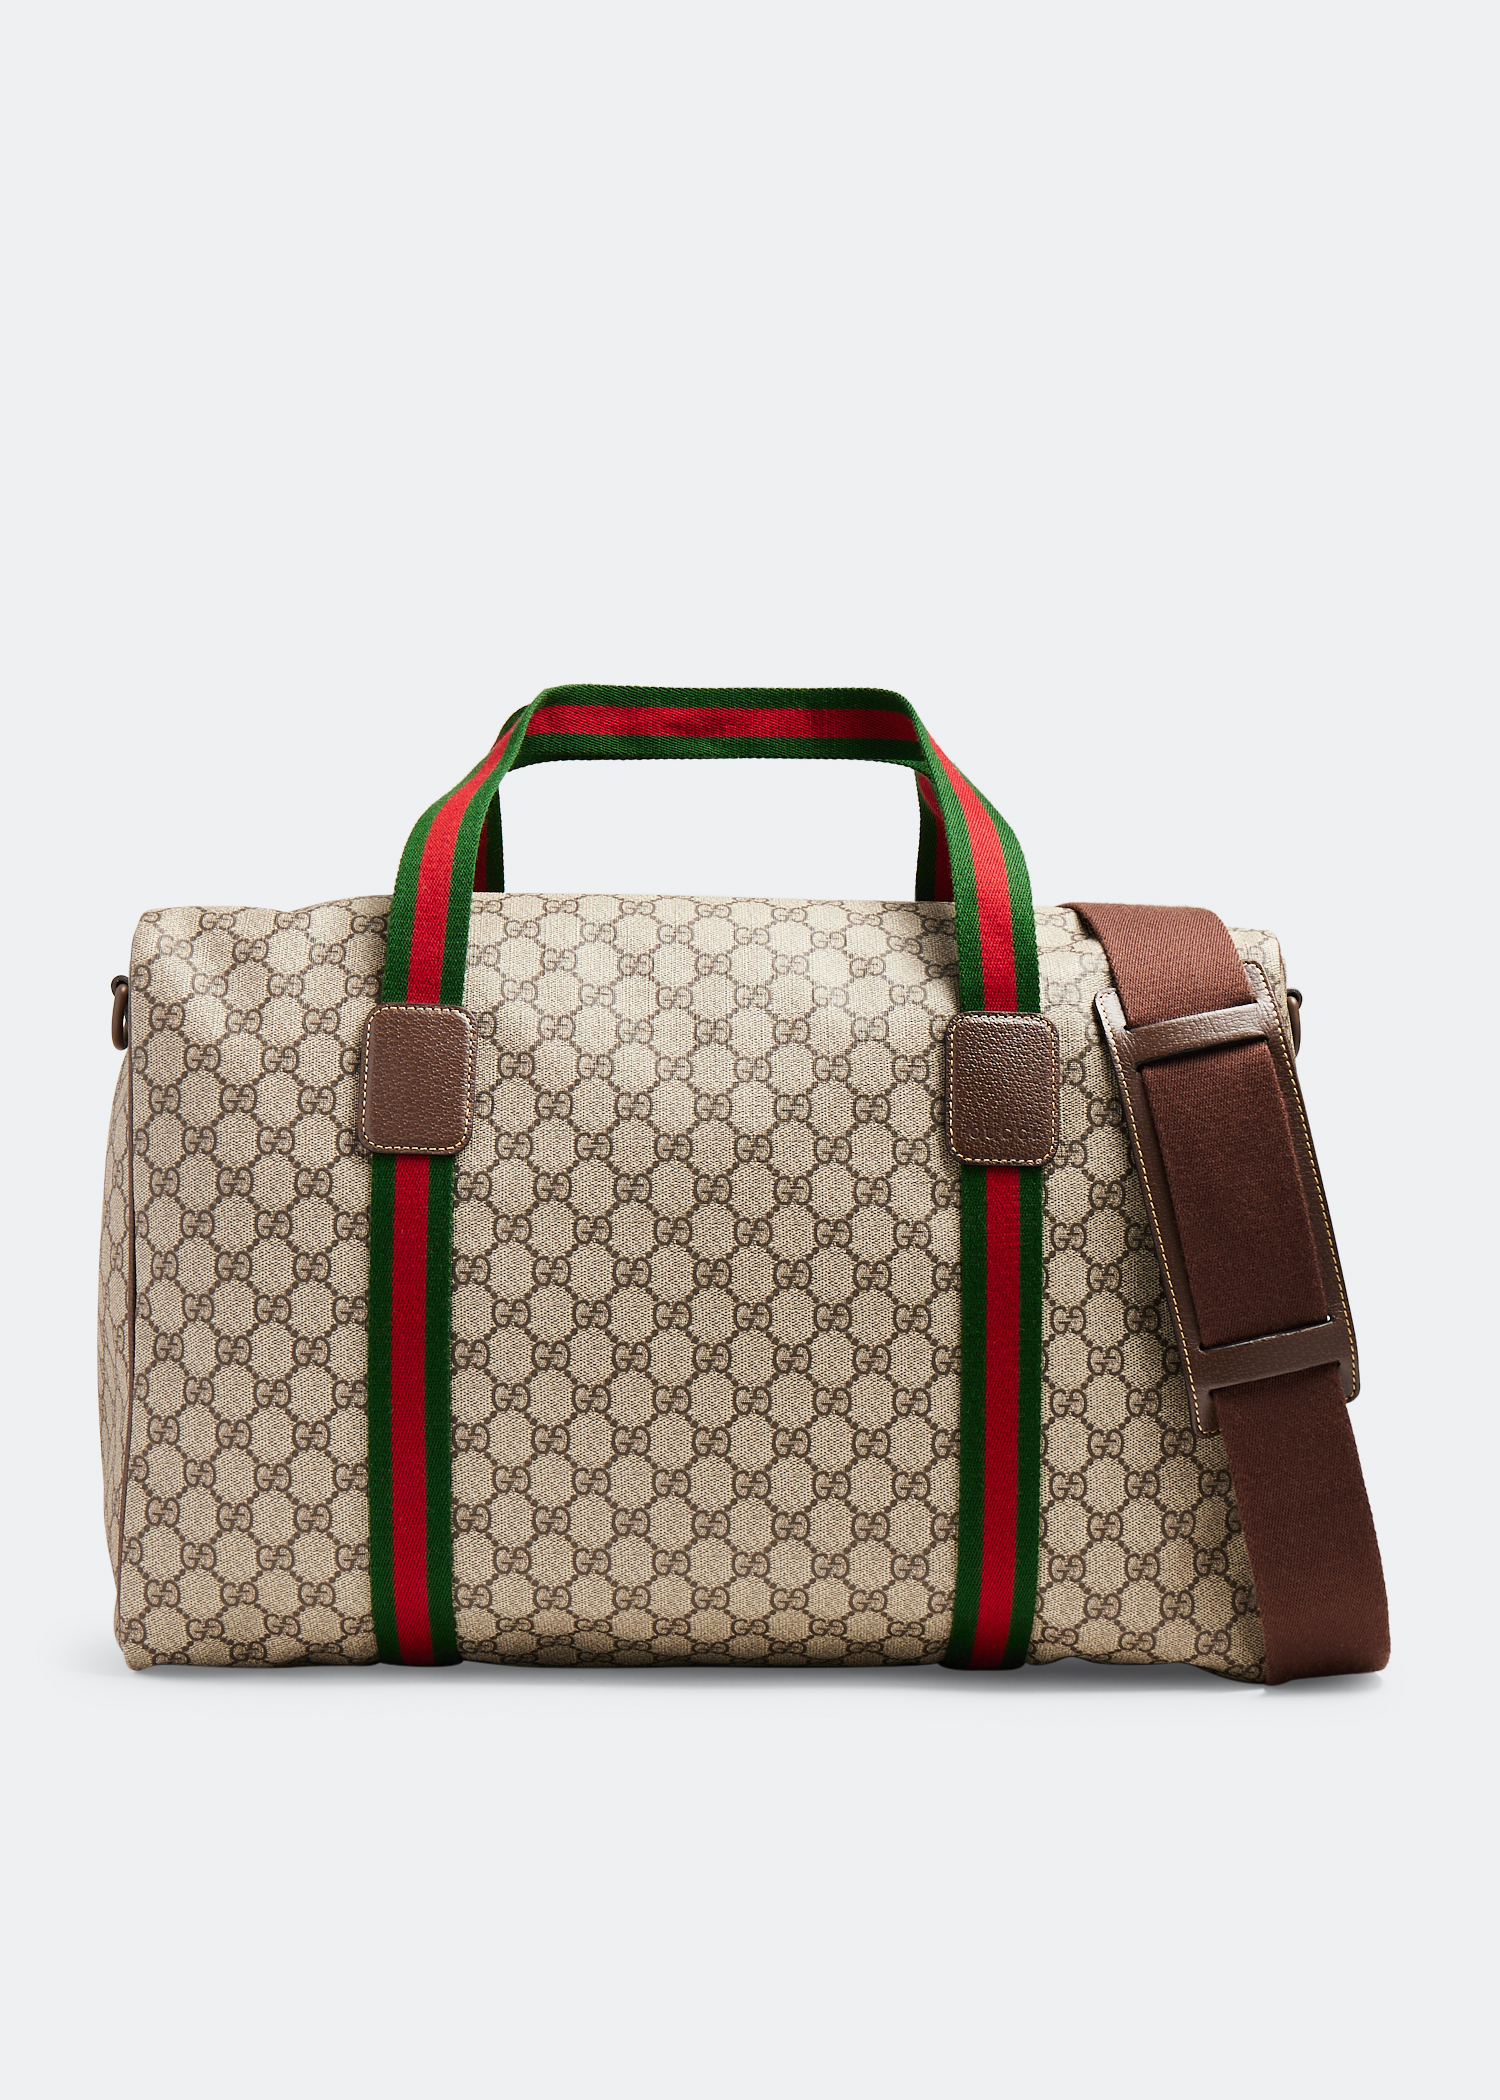 Gucci Large GG Supreme Canvas Duffle Bag in Brown